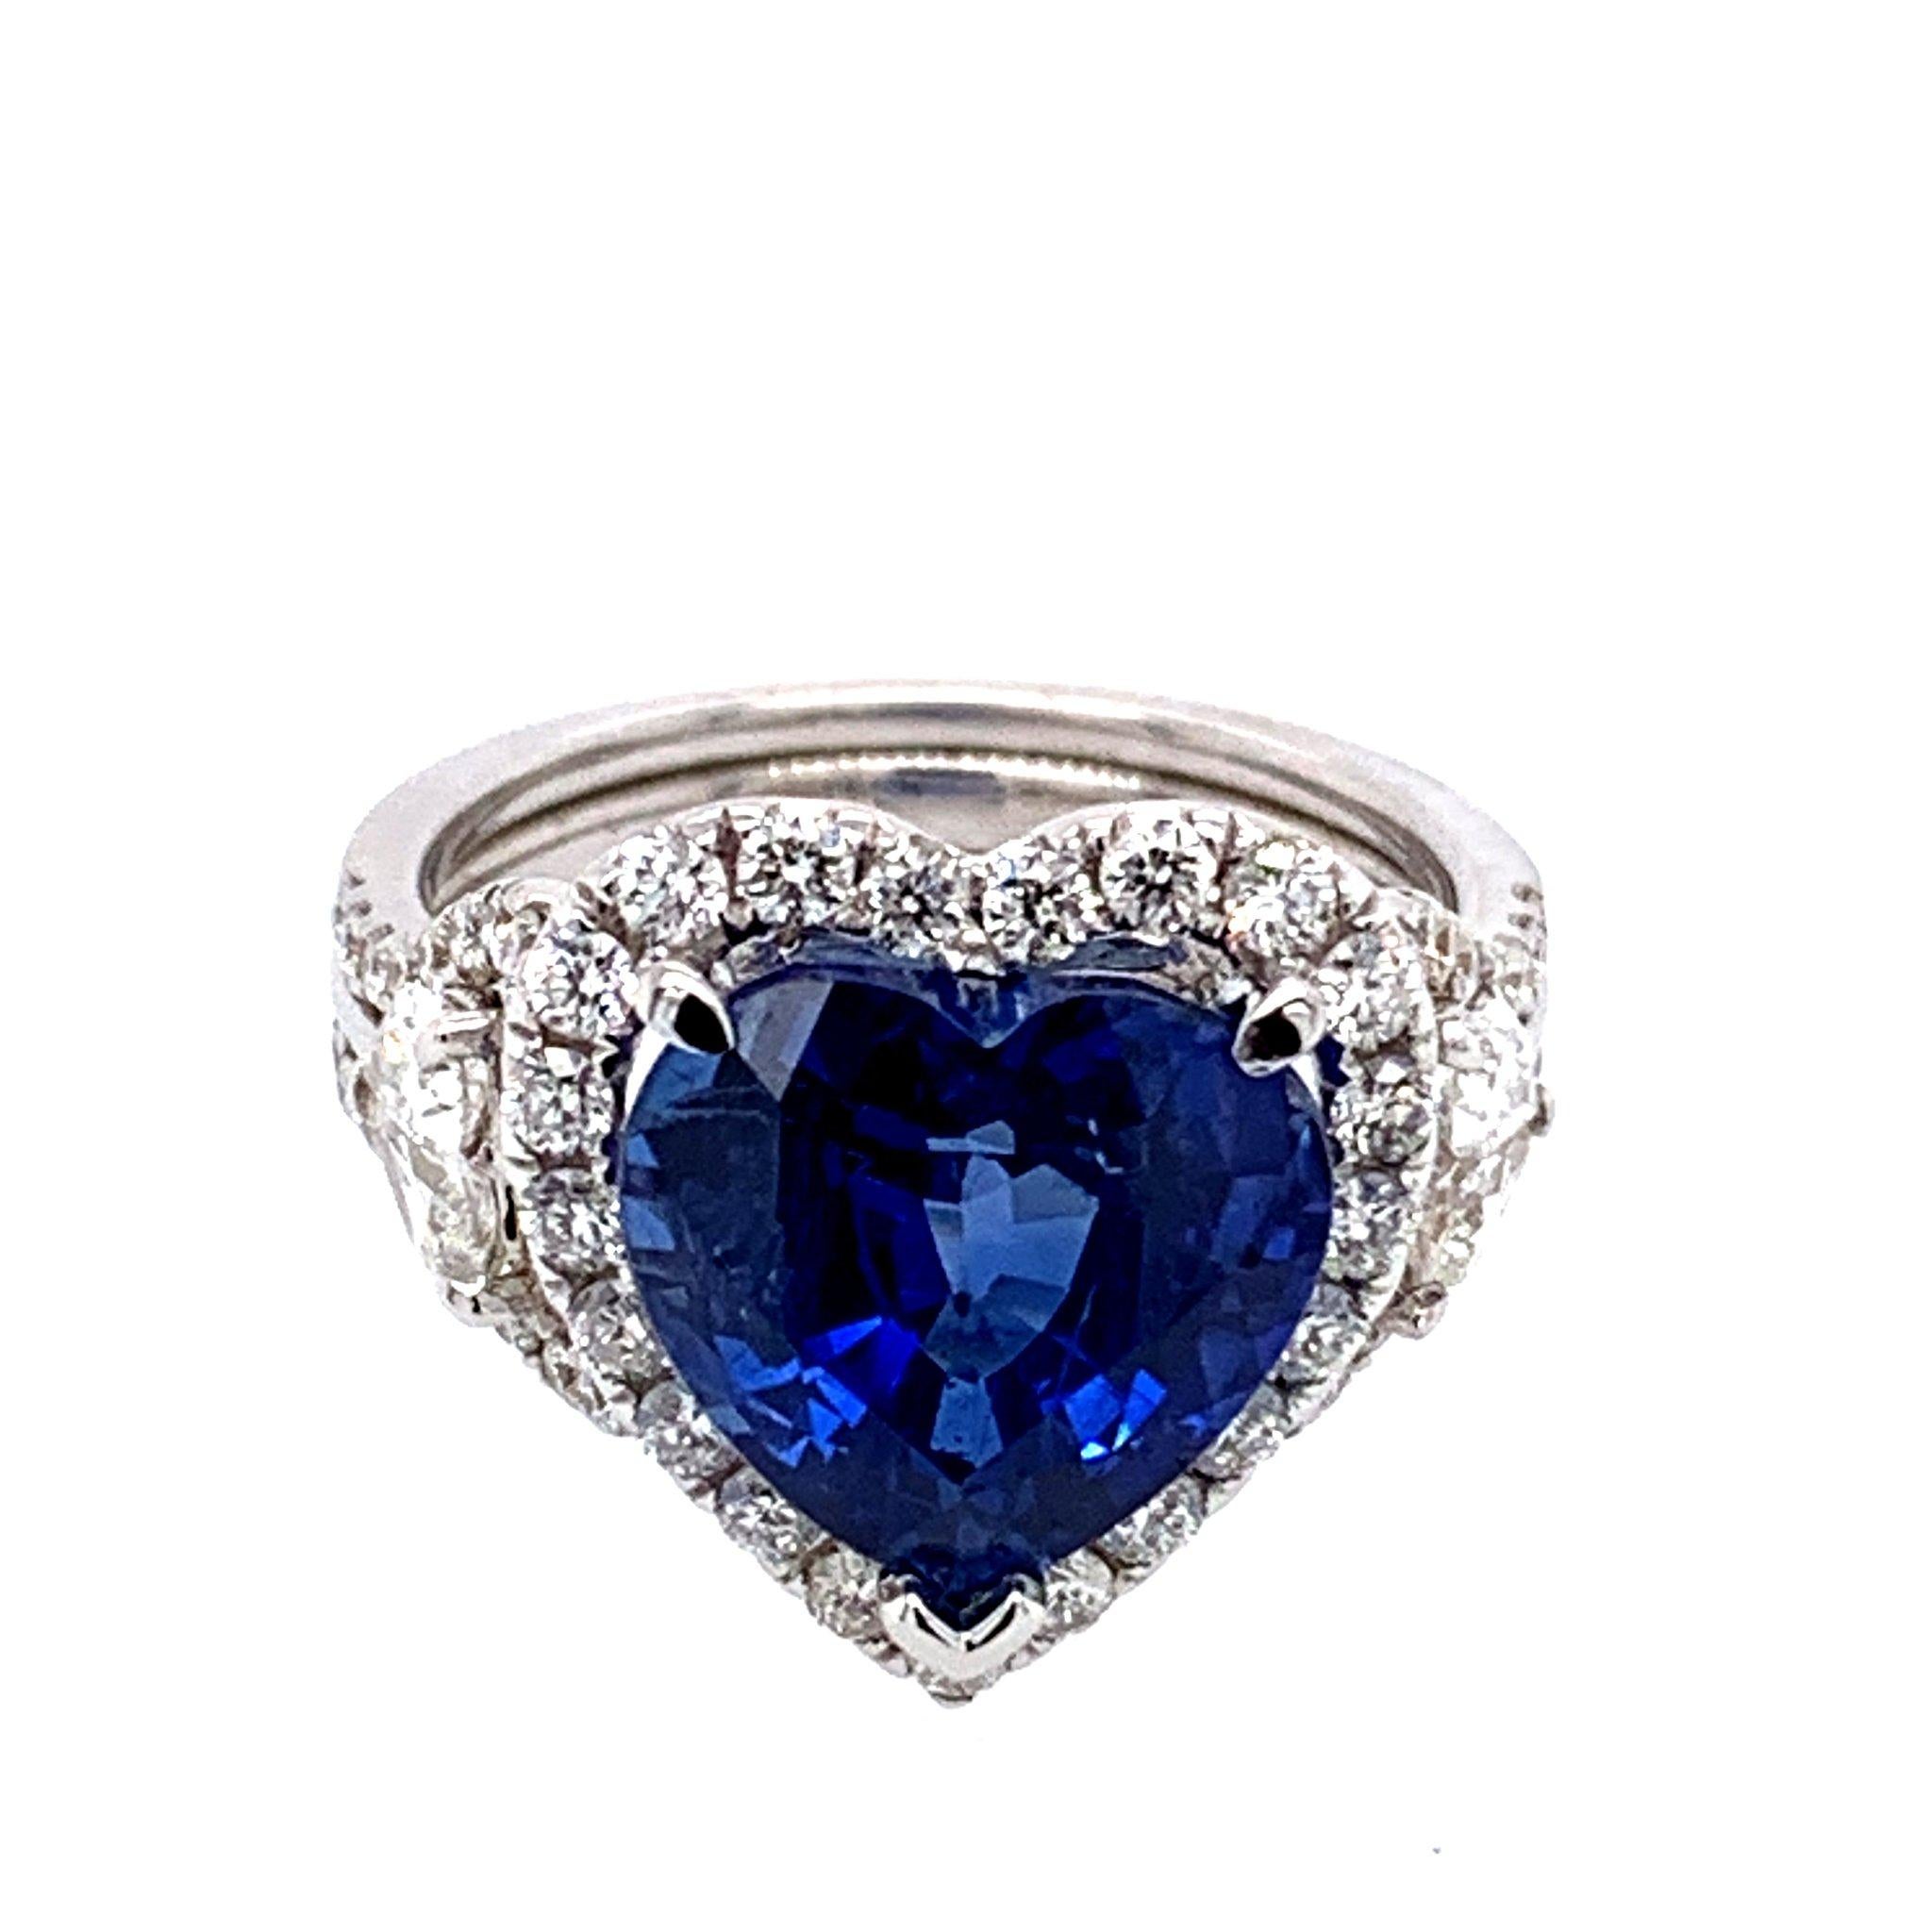 Celebrate your love with this unique, heart shaped blue sapphire and diamond Art Deco style ring. Blue heart shape natural Sapphire center stone is weighting 5.44 carat. Surrounded with 1.30 carat of white diamonds. The ring is crafted in 18k white